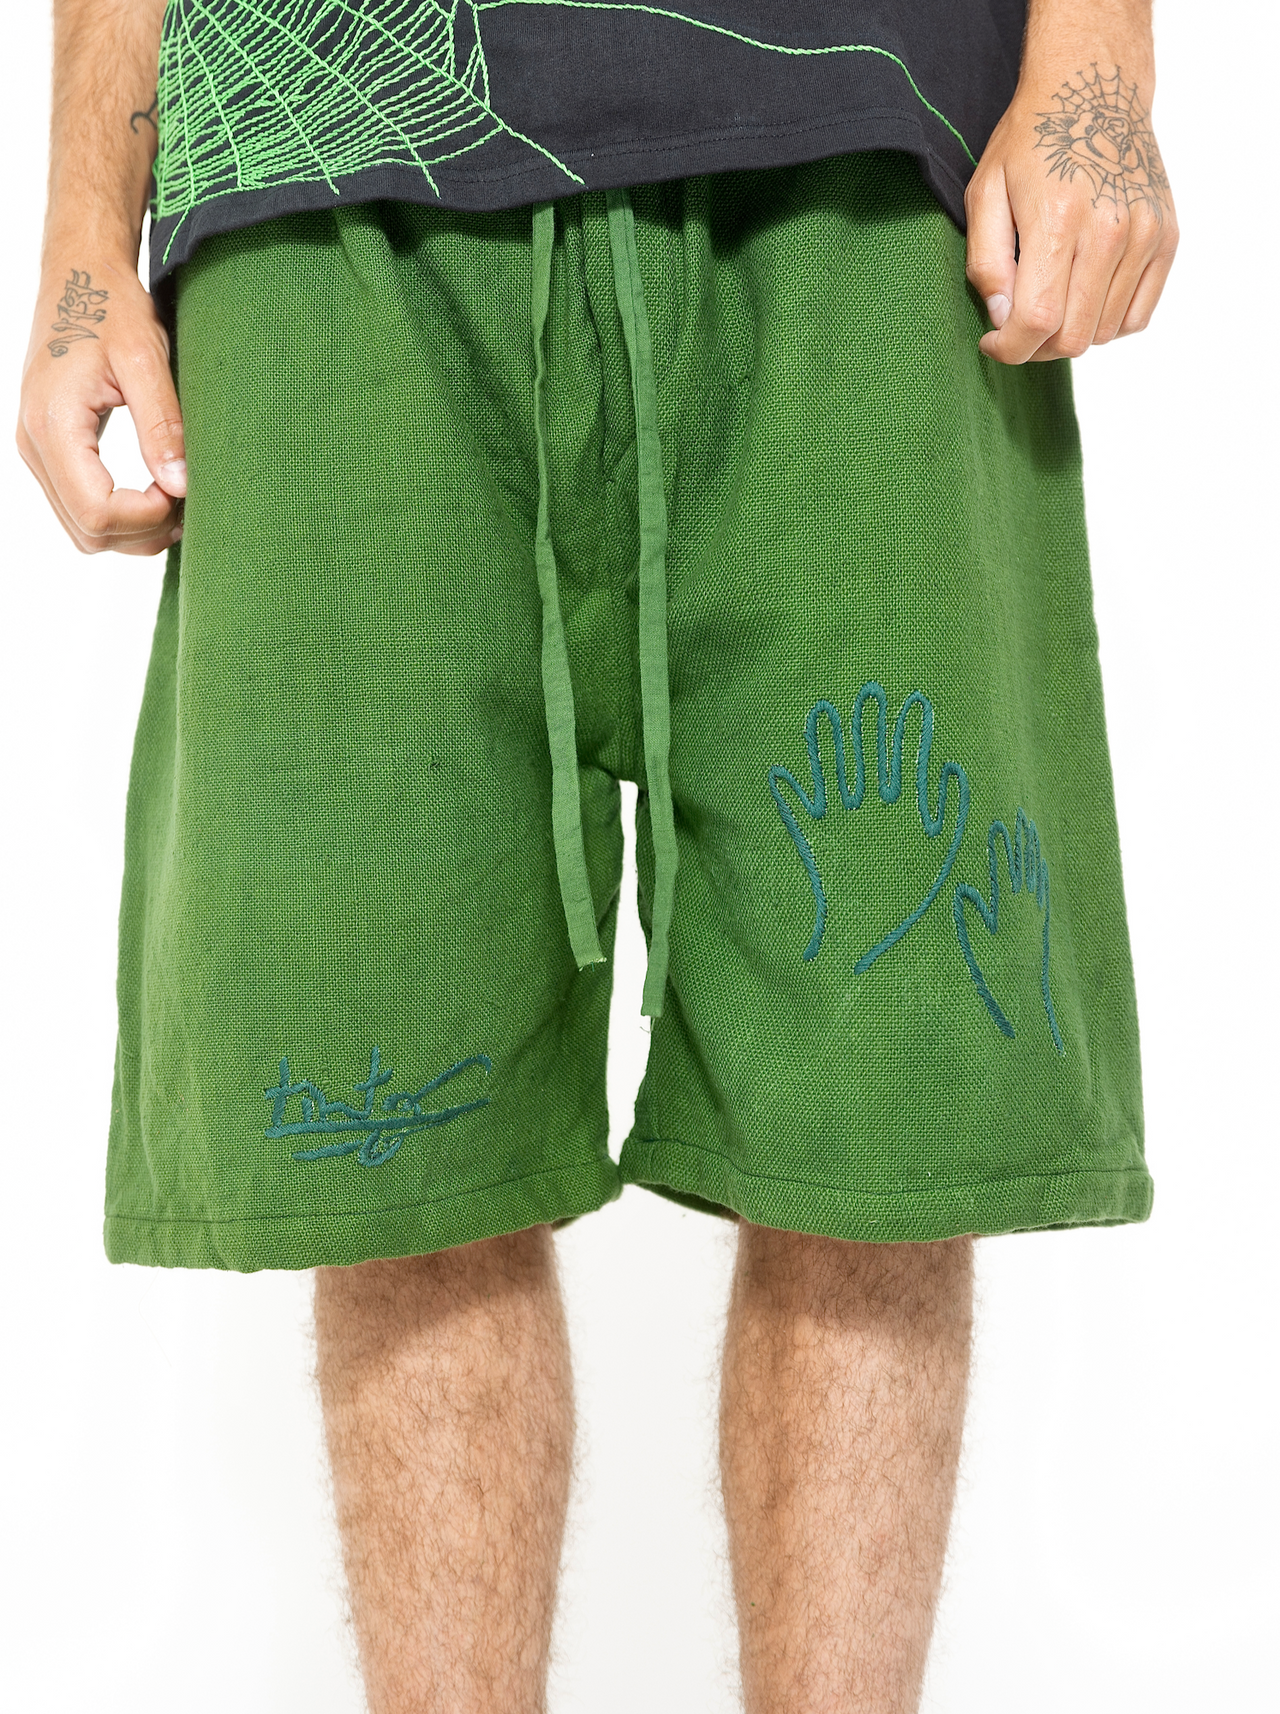 forest green 100% organic cotton shorts